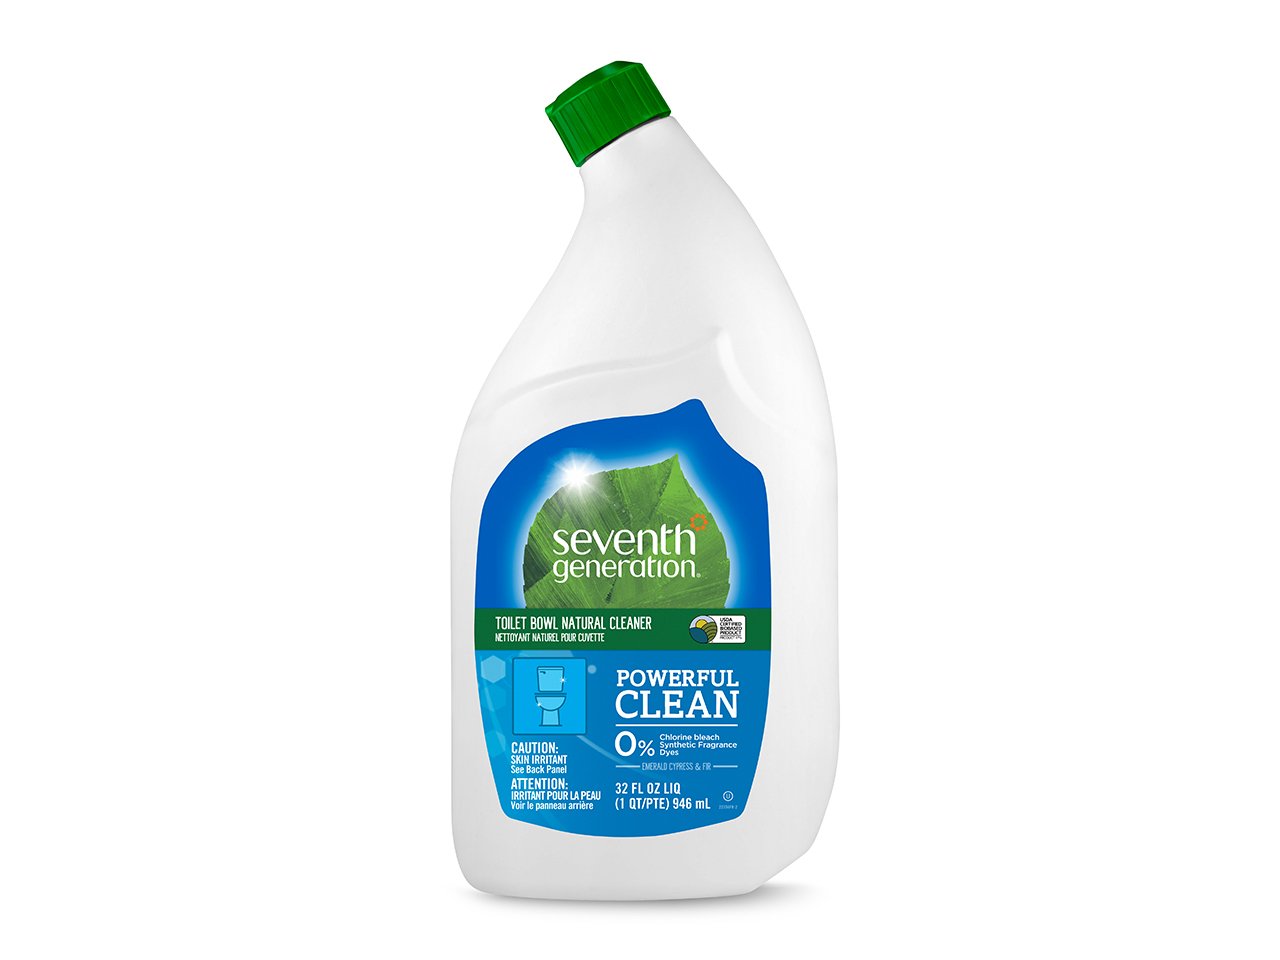 Eco-friendly cleaning products, Seventh Generation toilet bowl cleaner bottle